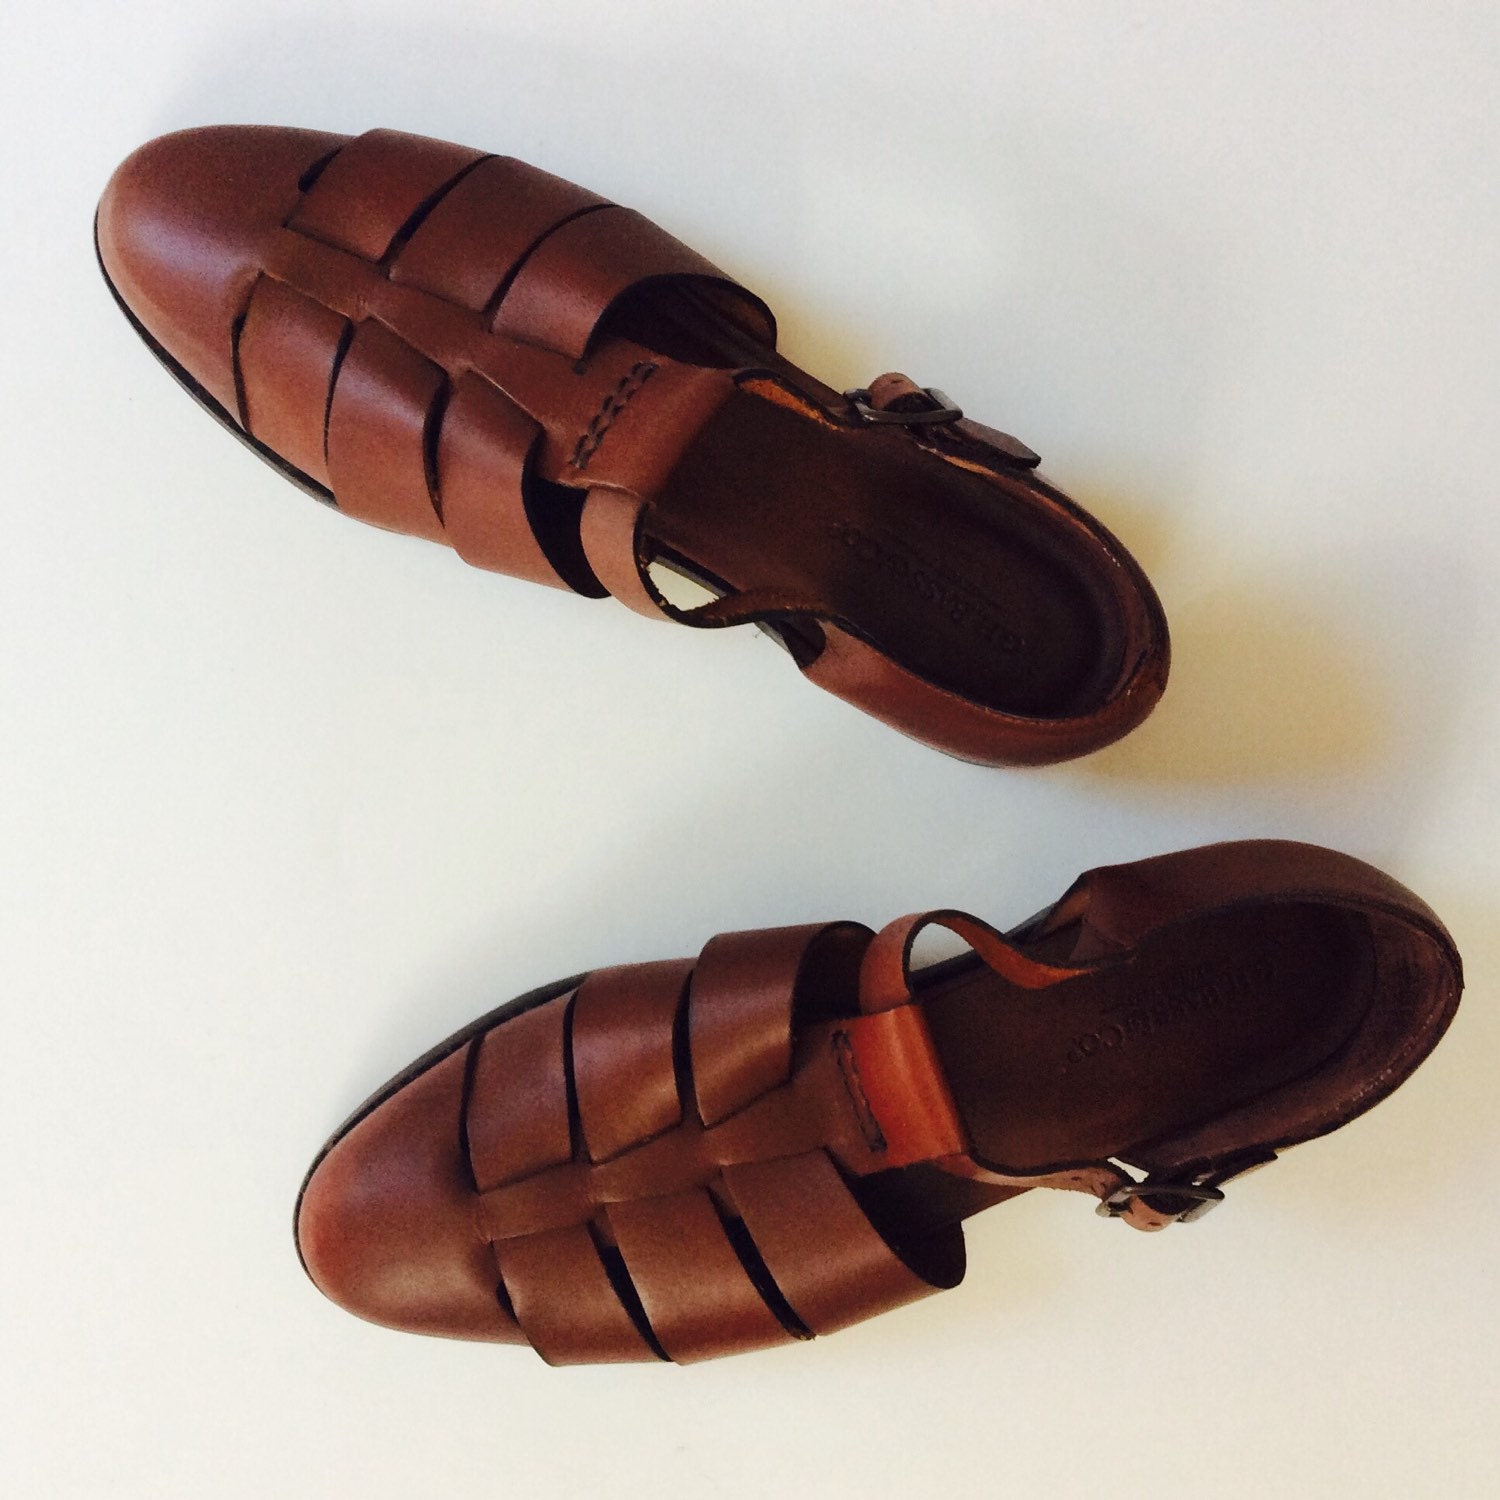 Woven leather sandals closed toe sandals 8.5 sandals brown